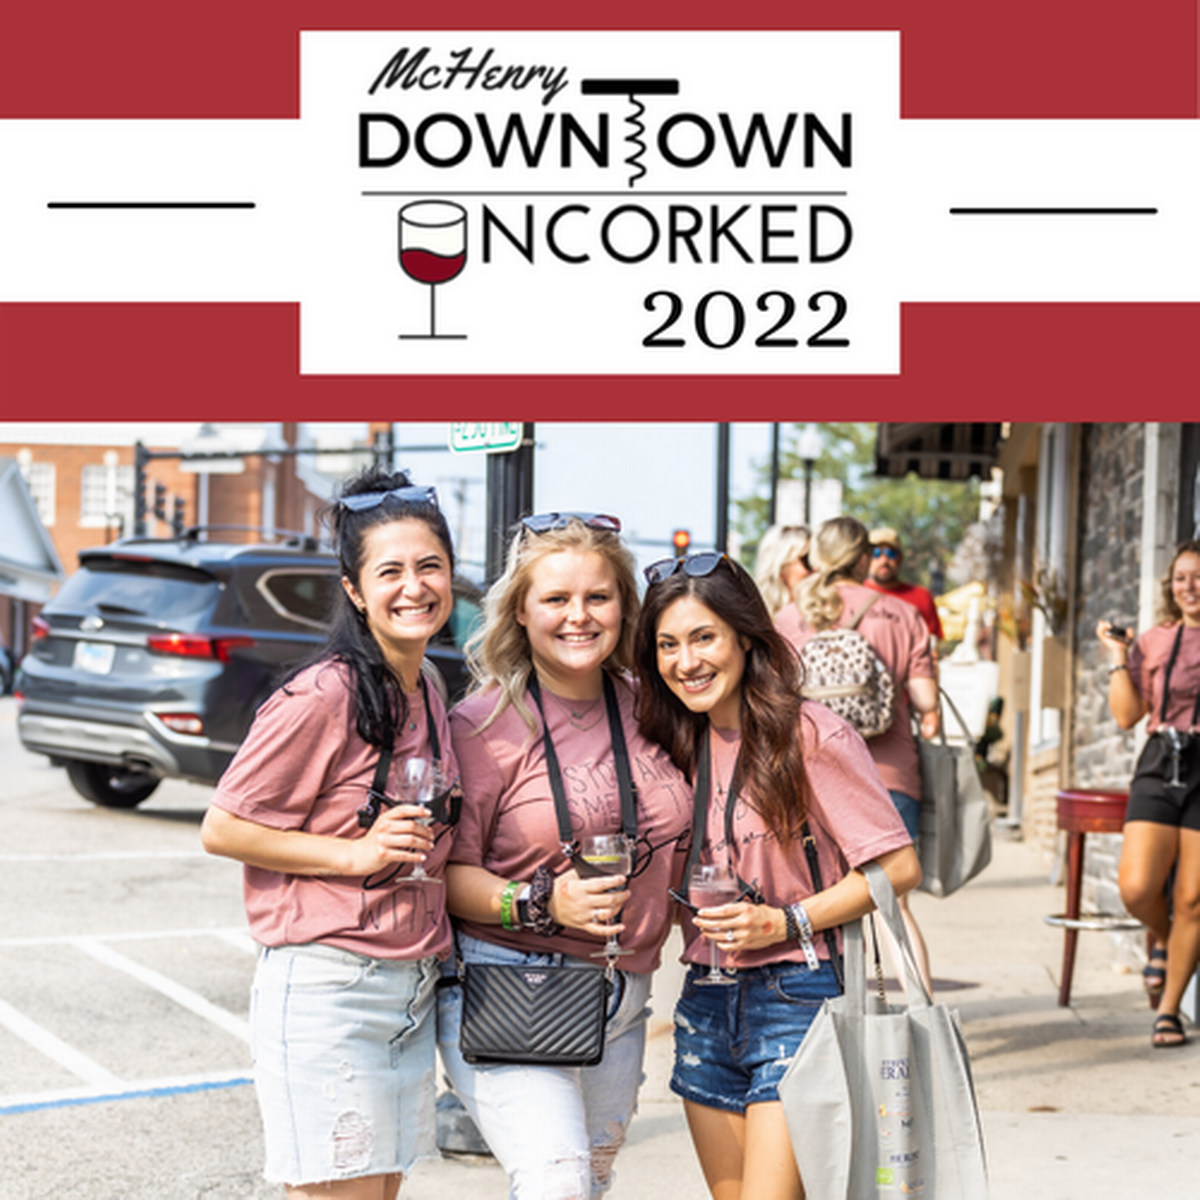 McHenry Downtown Uncorked - 2022